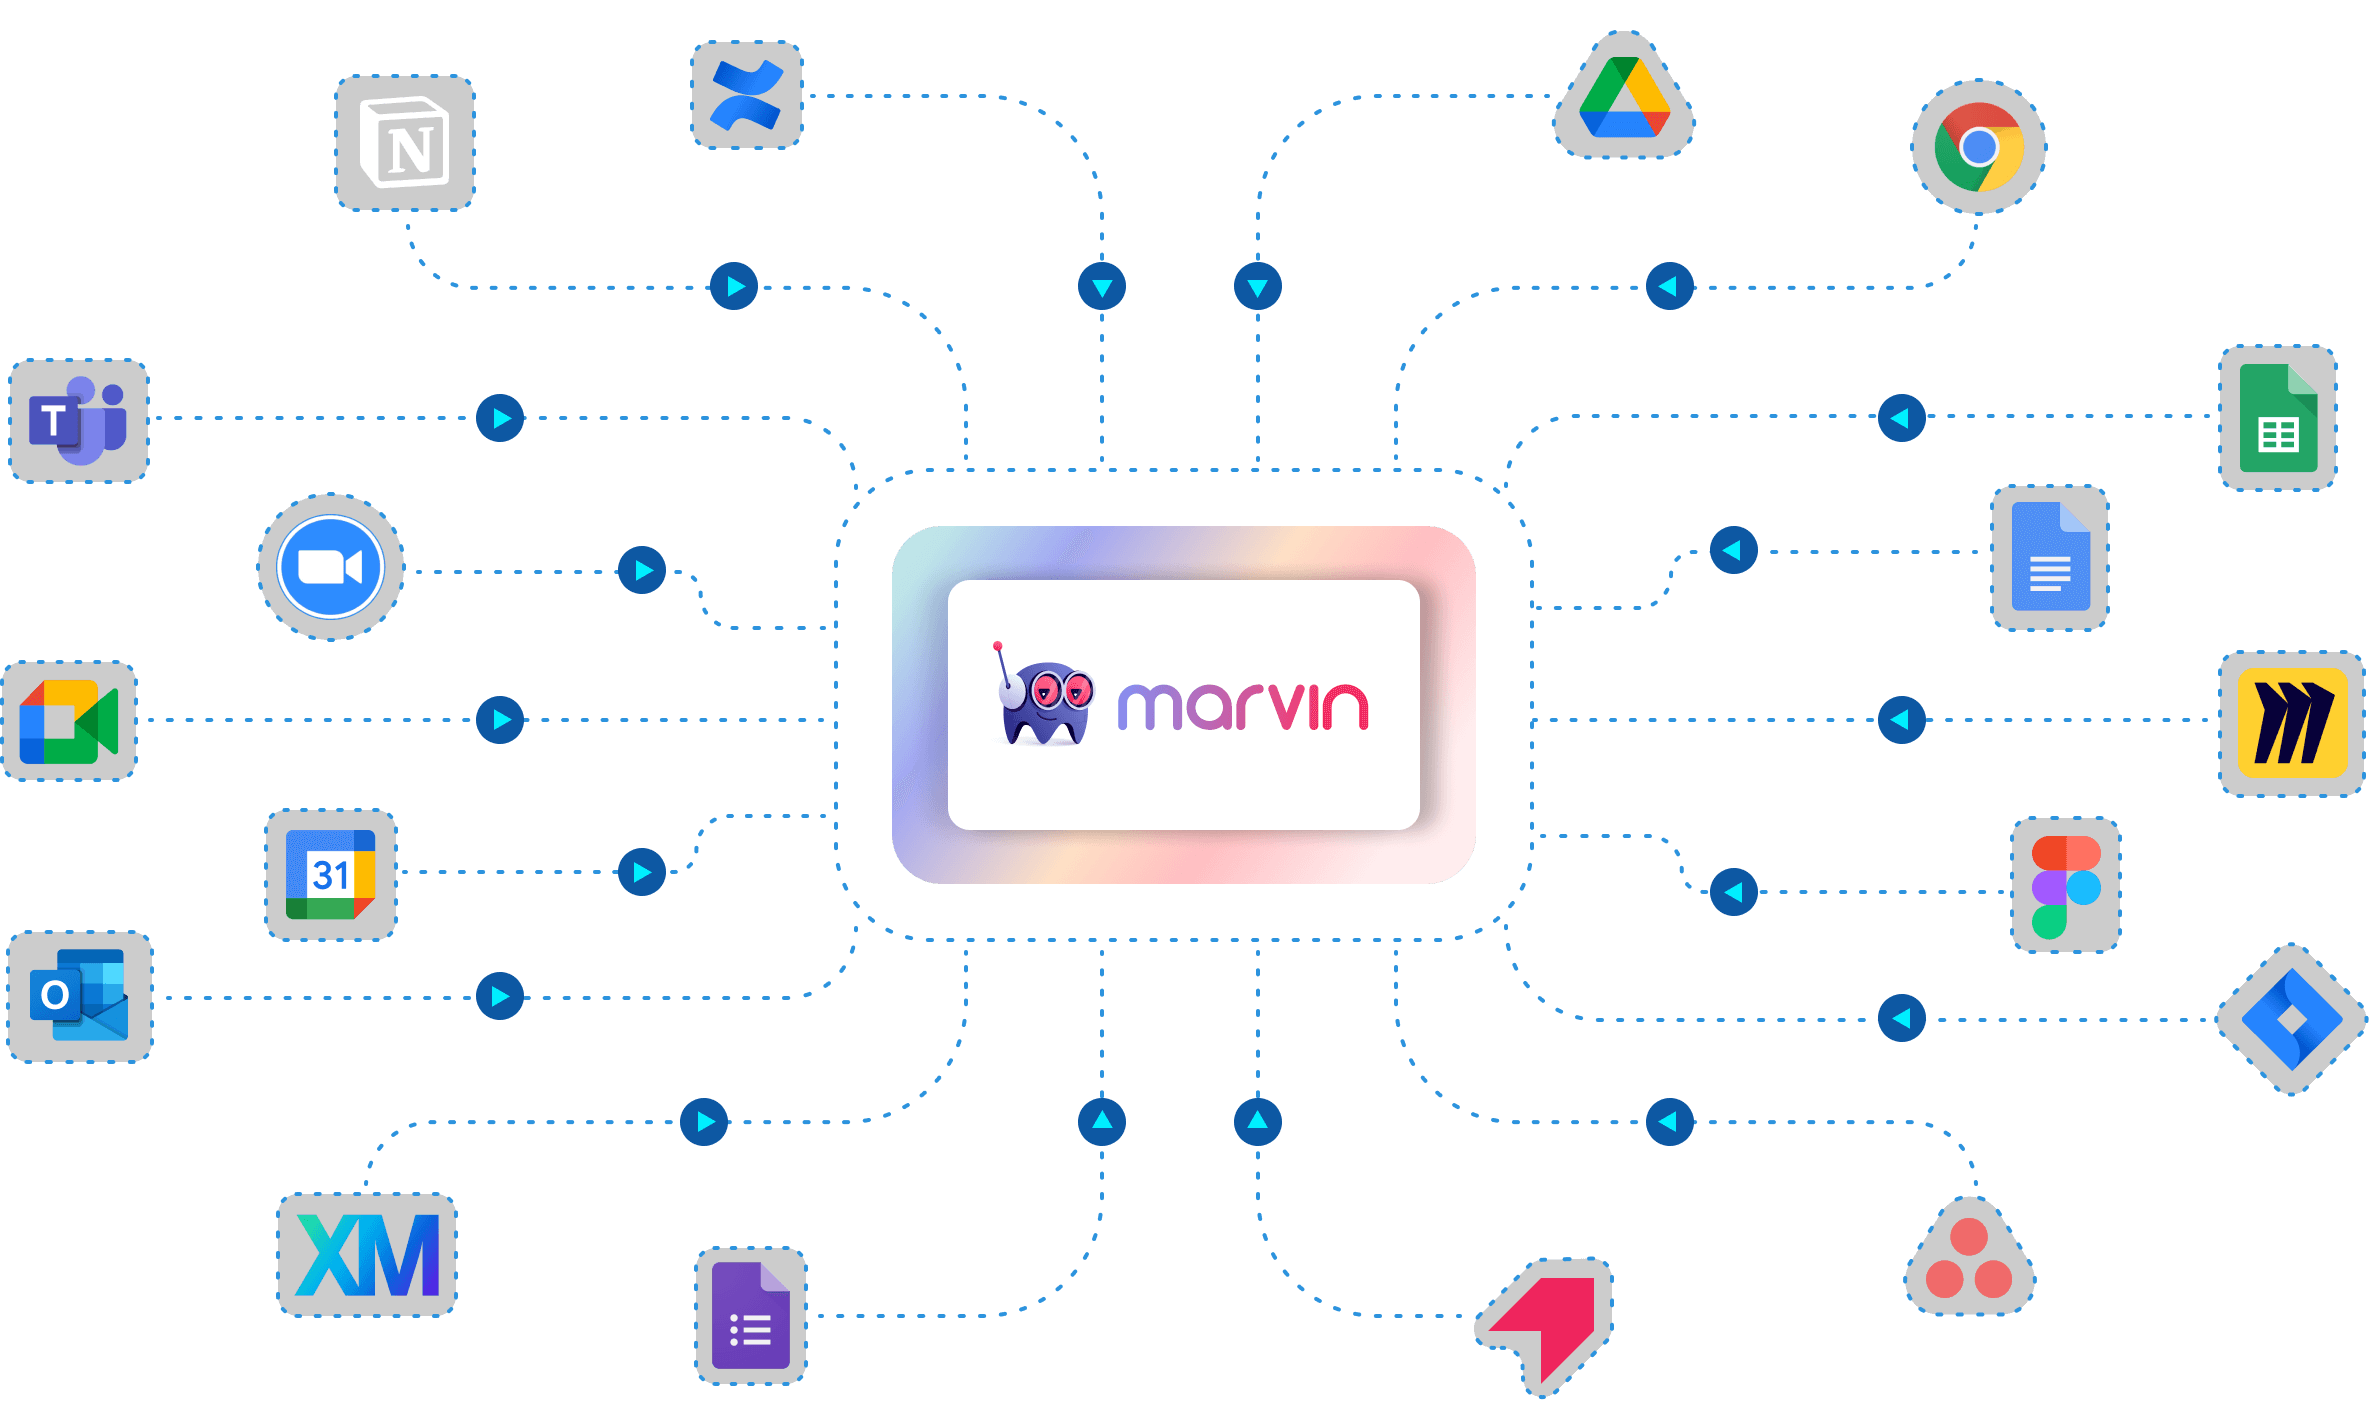 Marvin integrates with your favorite tools and fits right into your existing productivity workflows